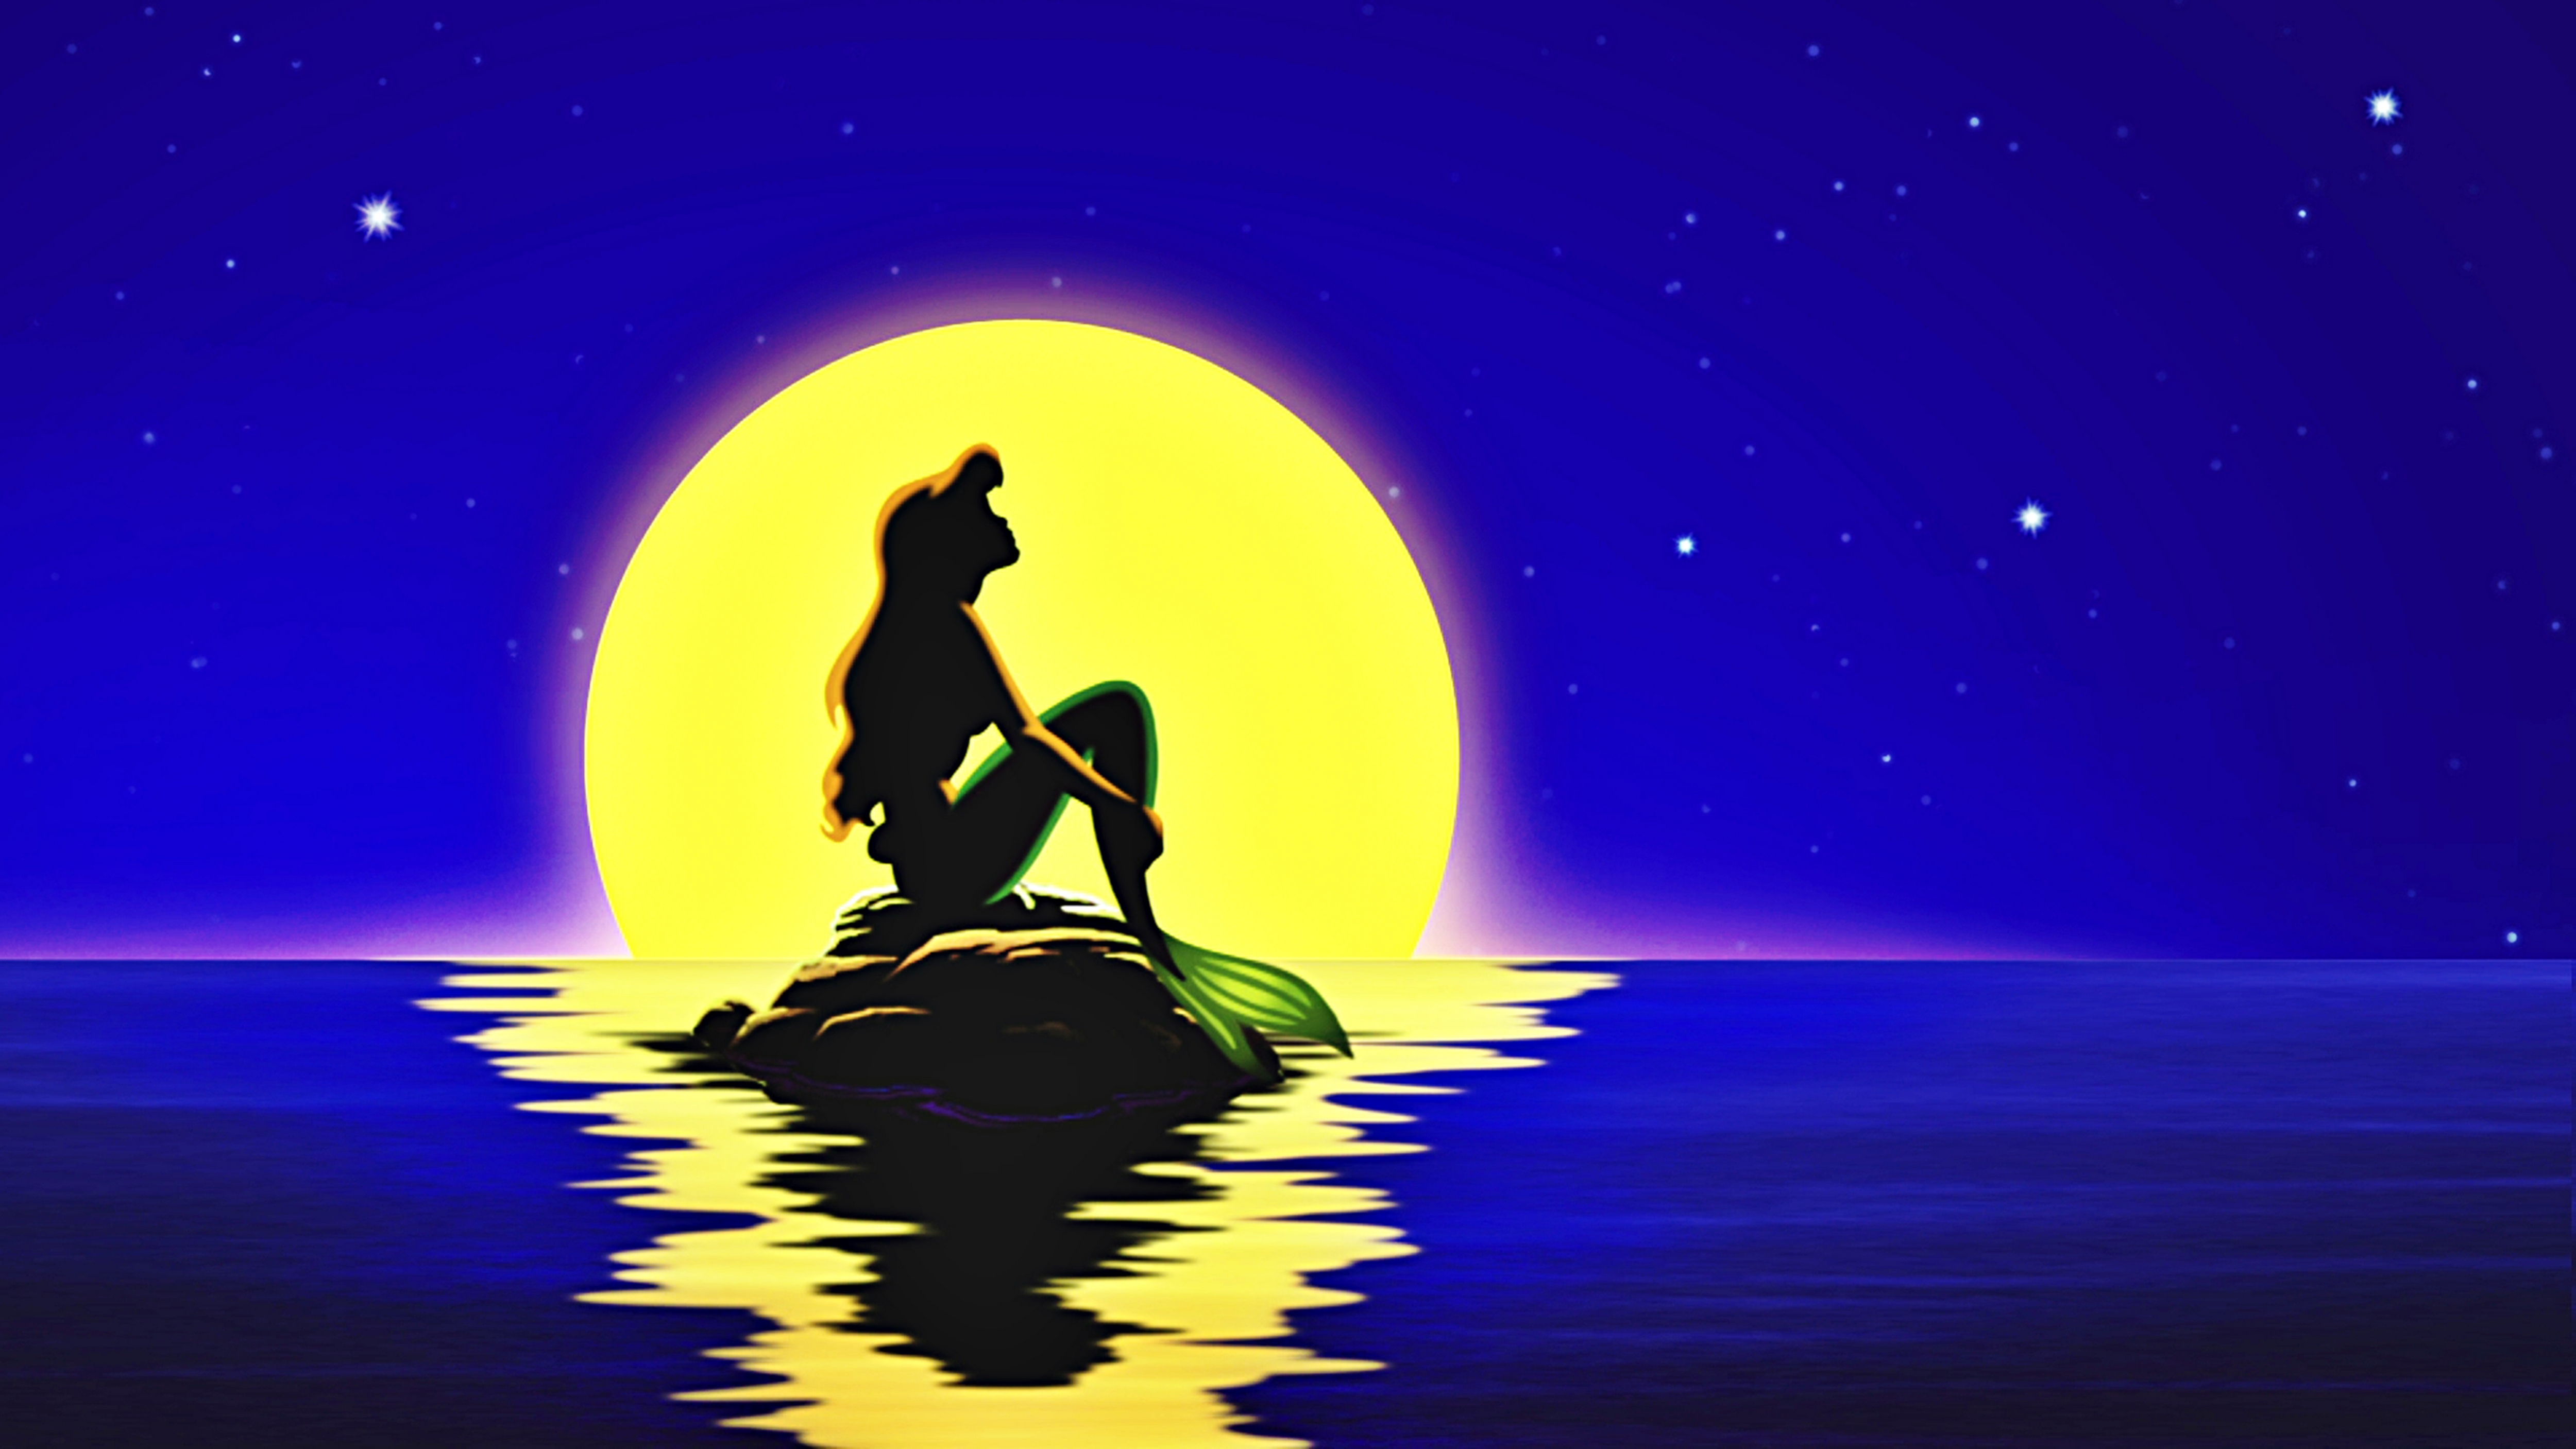 Little Mermaid IPhone Wallpapers 74 images